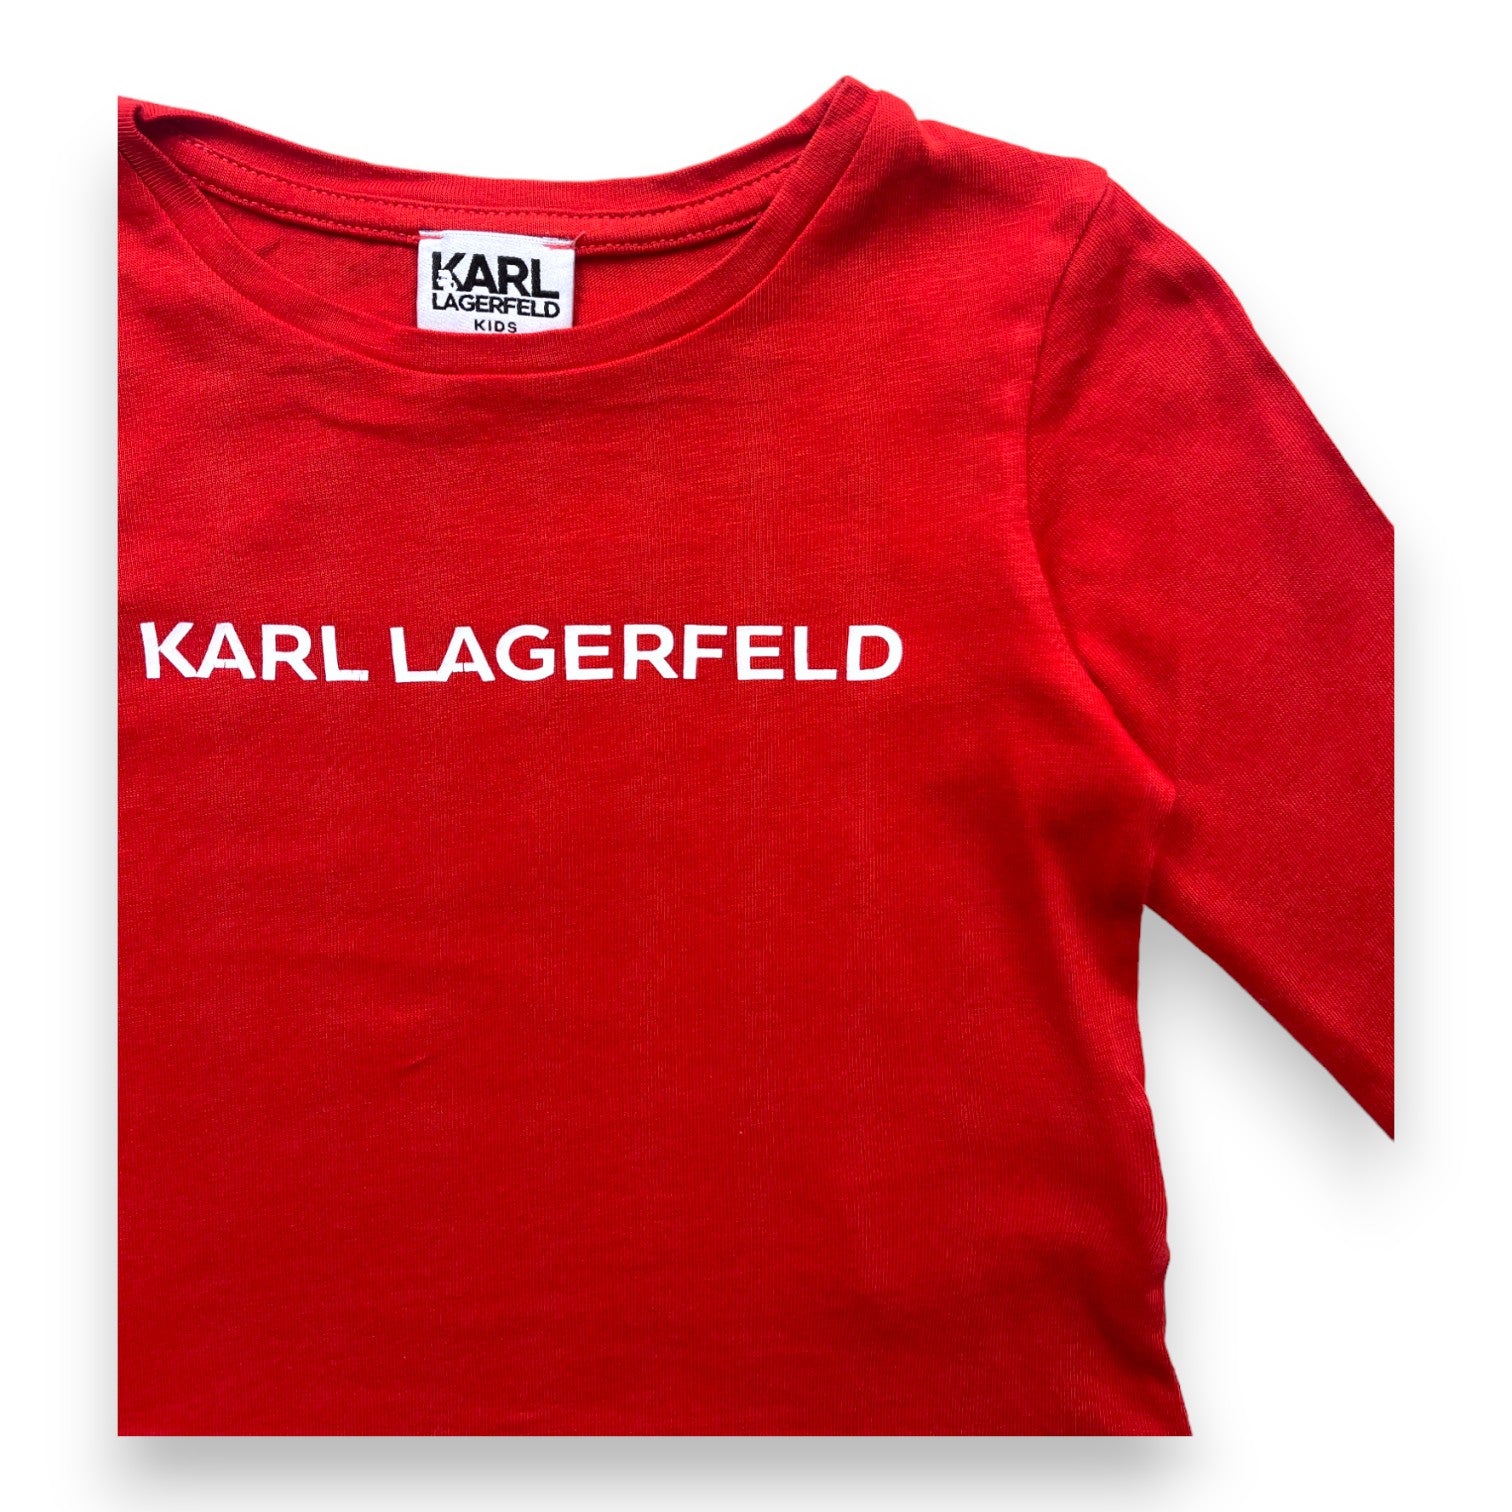 KARL LAGERFELD - T shirt manches longues rouge "Karl Lagerfeld" - 2 ans